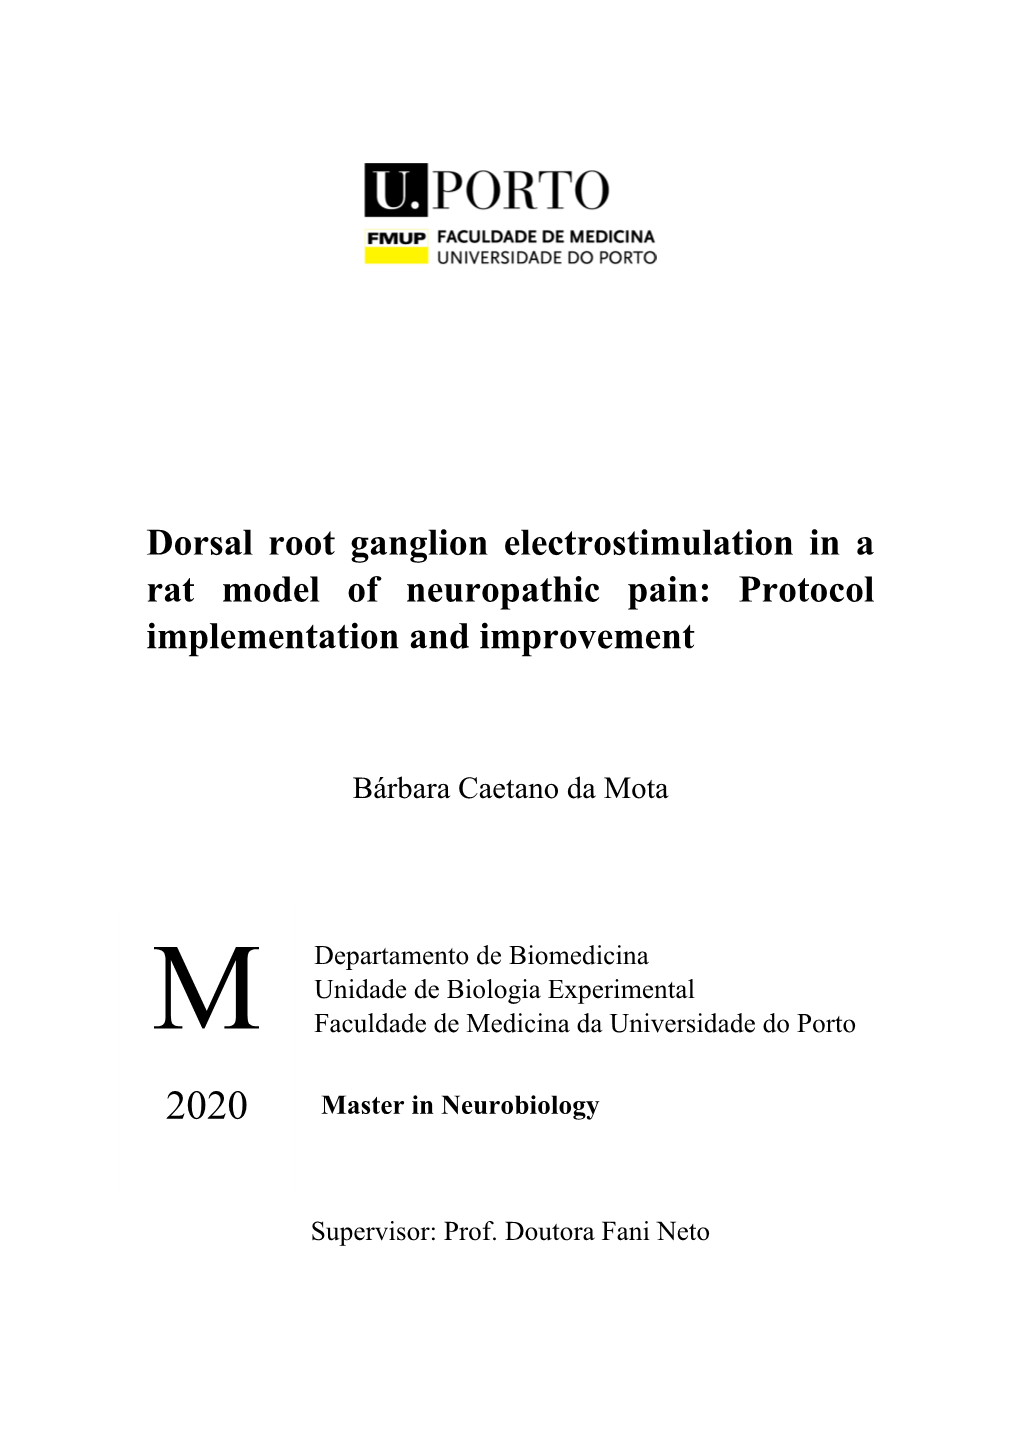 Dorsal Root Ganglion Electrostimulation in a Rat Model of Neuropathic Pain: Protocol Implementation and Improvement